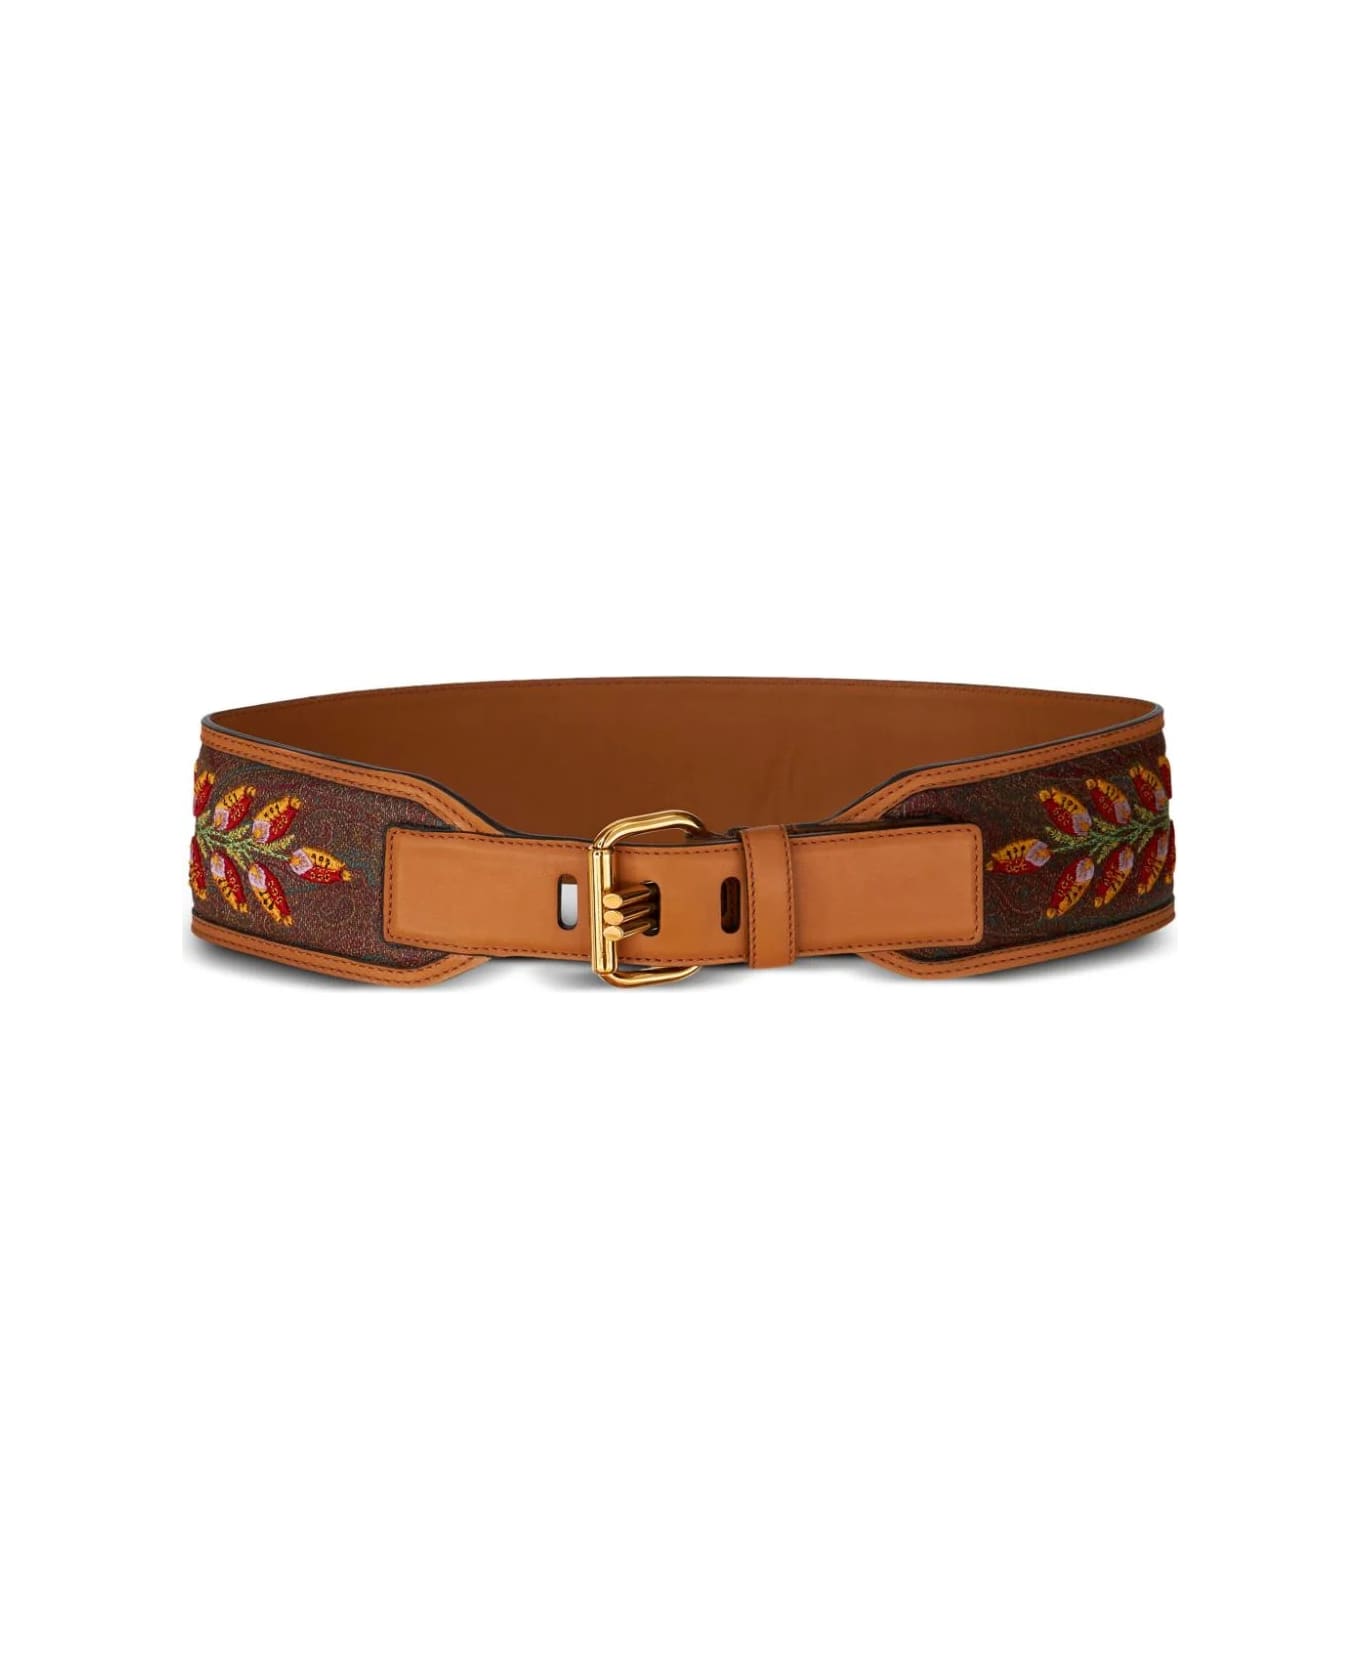 Etro Brown Paisley Belts With Embroideries - Bruciato